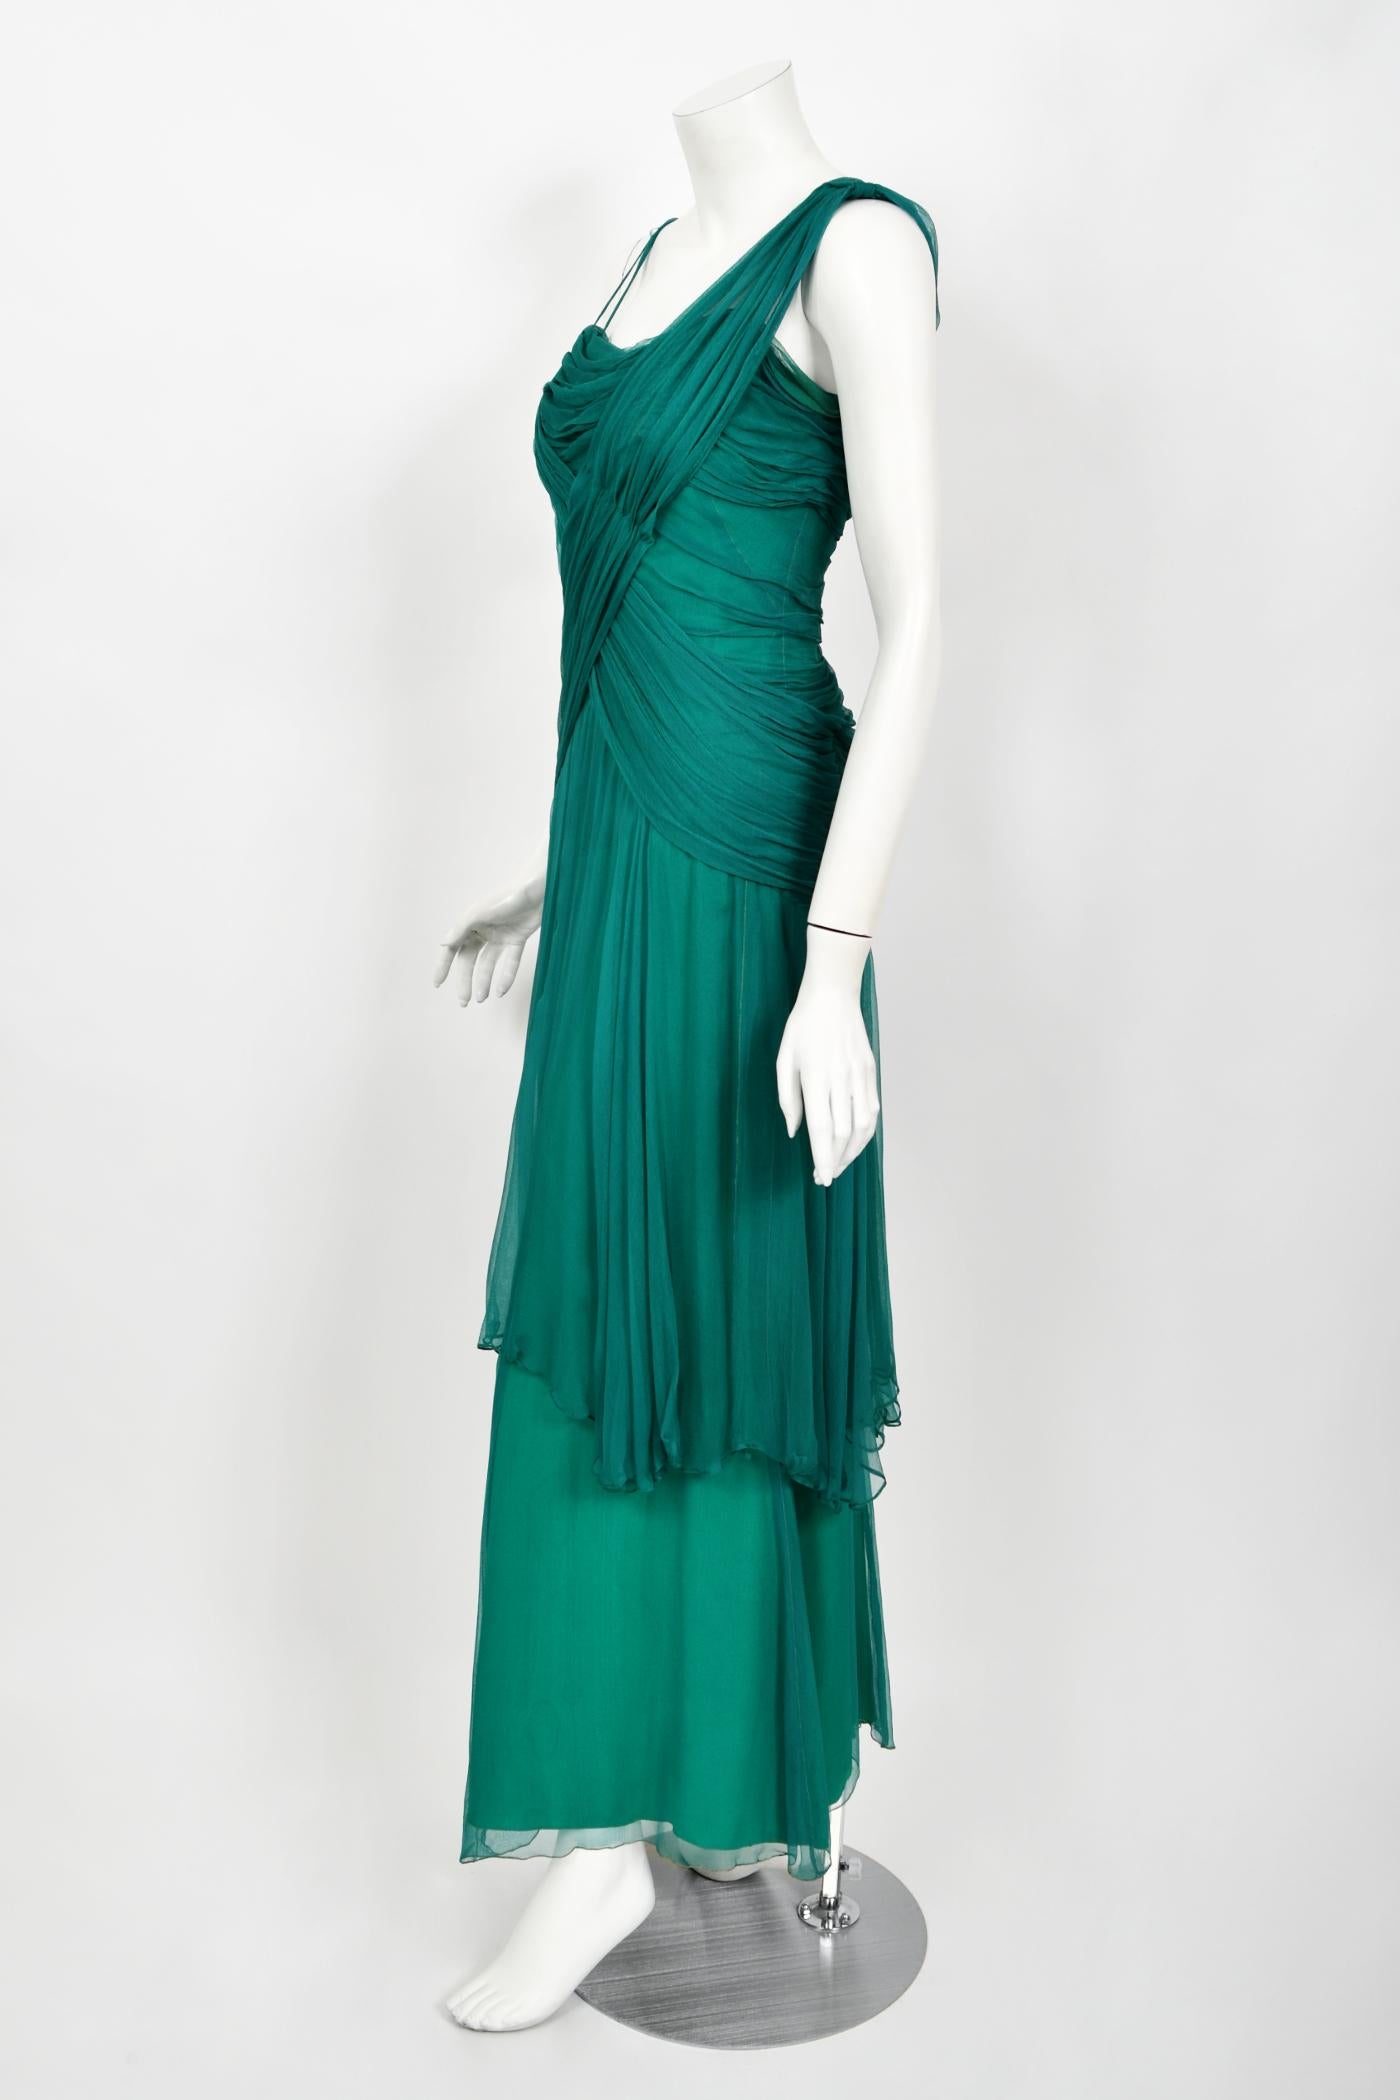 Vintage 1950's Irene Lentz Couture Teal Green Draped Silk Grecian Goddess Gown For Sale 2